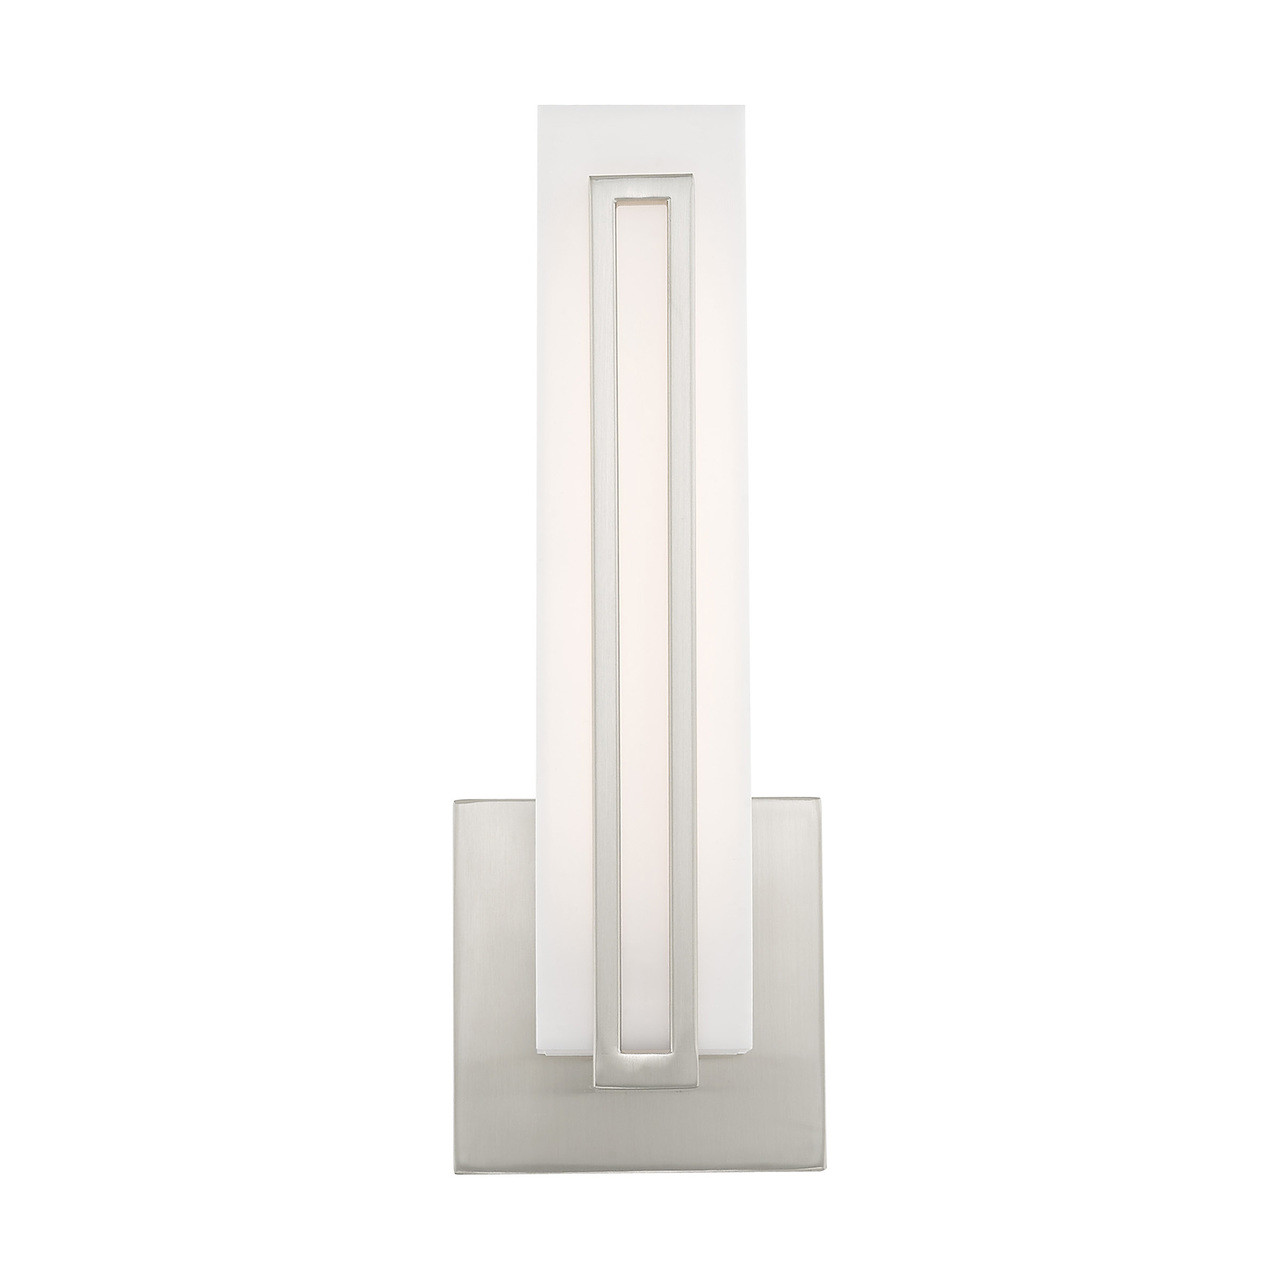 LIVEX LIGHTING 10190-91 10W LED Brushed Nickel ADA Wall Sconce